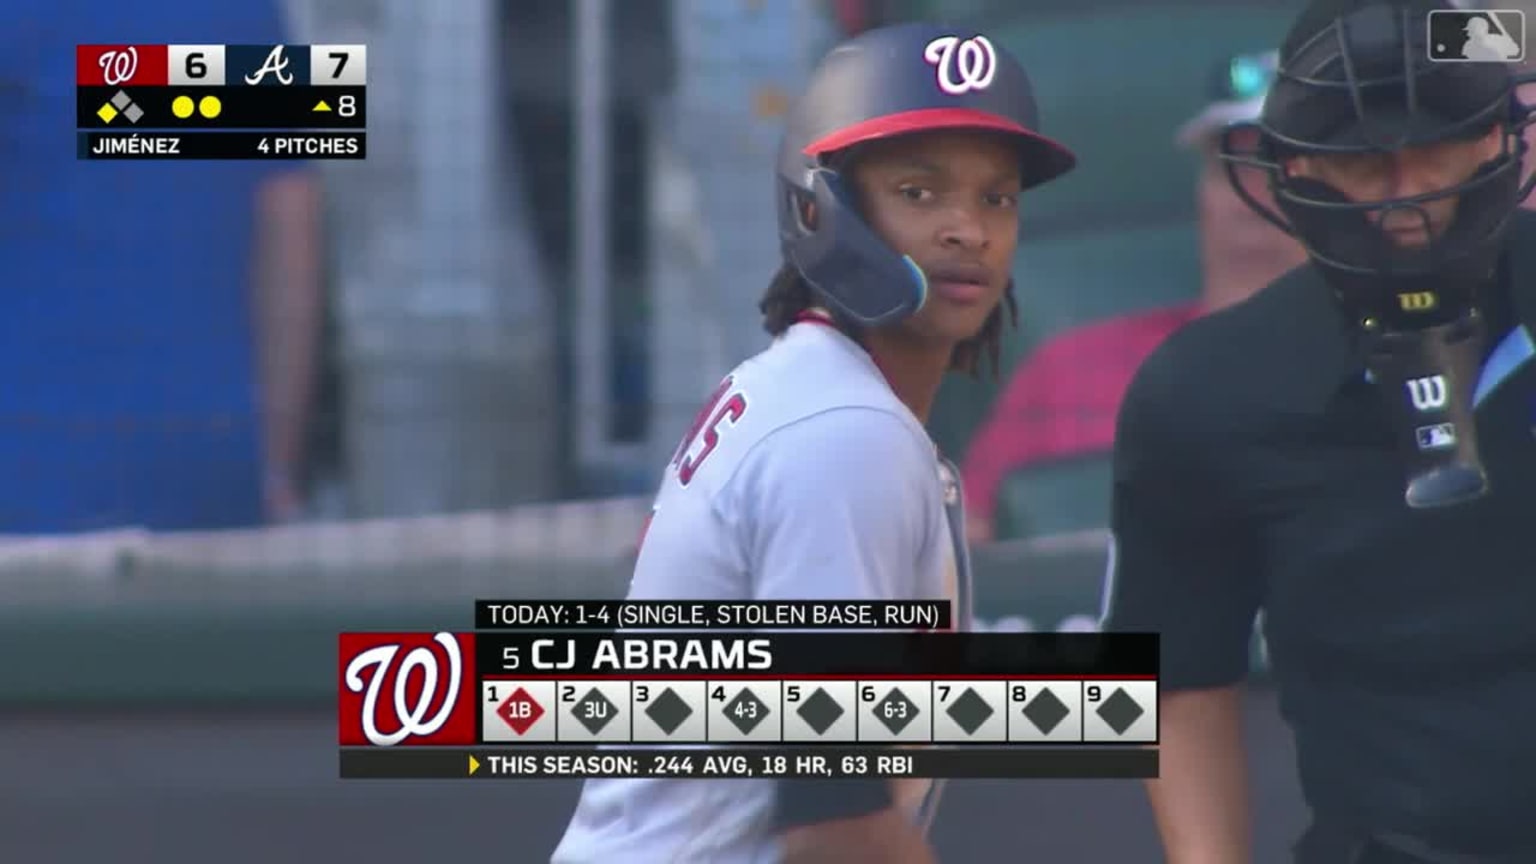 CJ Abrams Steals Two Bags In Extra-Inning Loss - MLB News